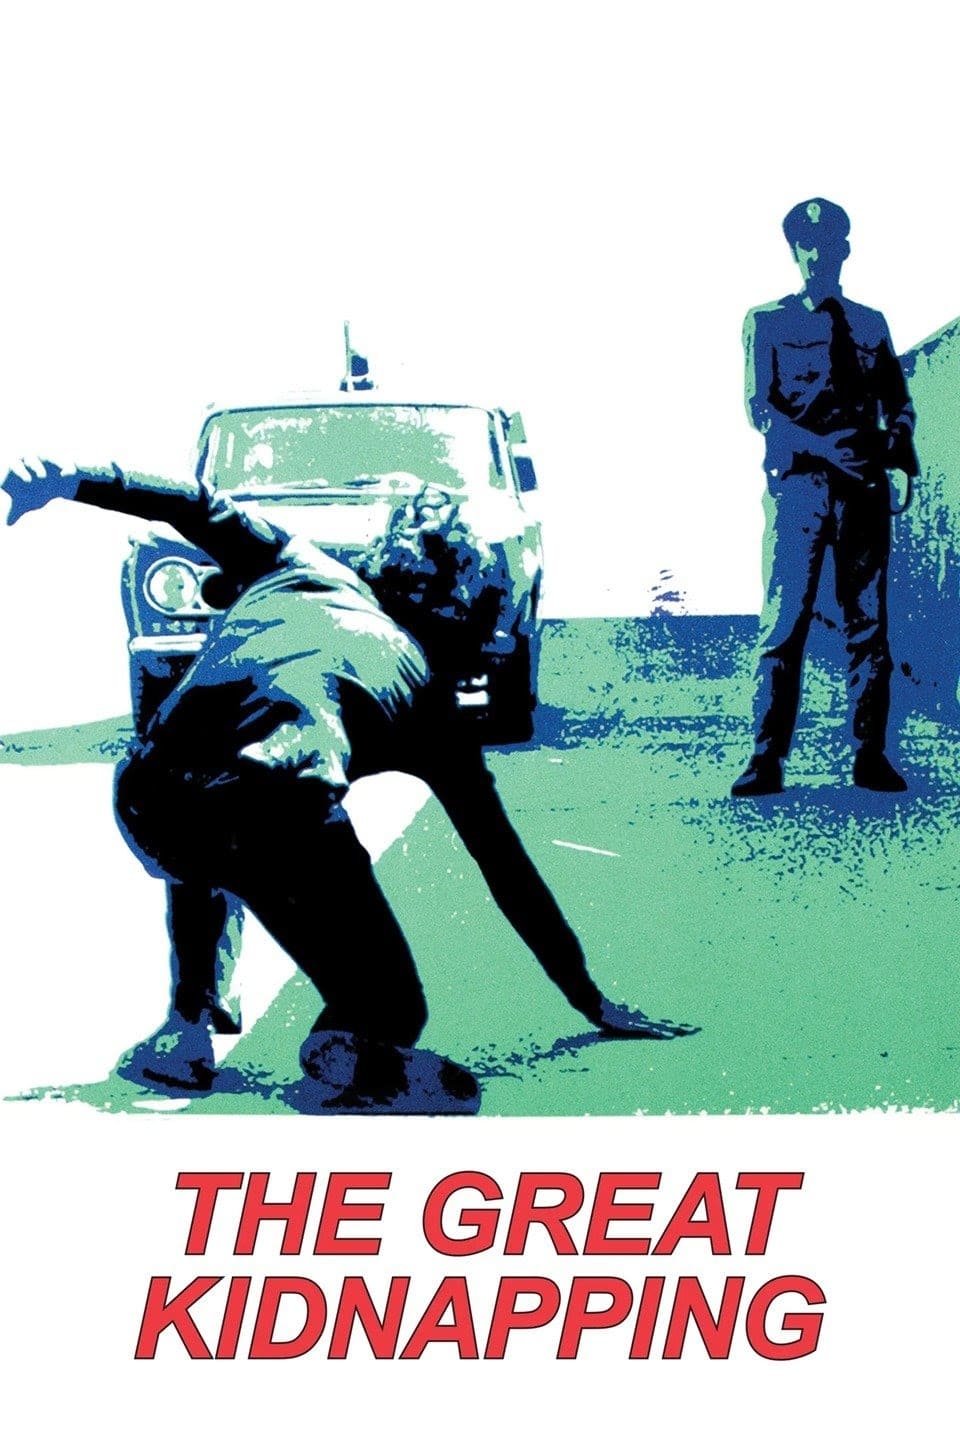 The Great Kidnapping (1973)